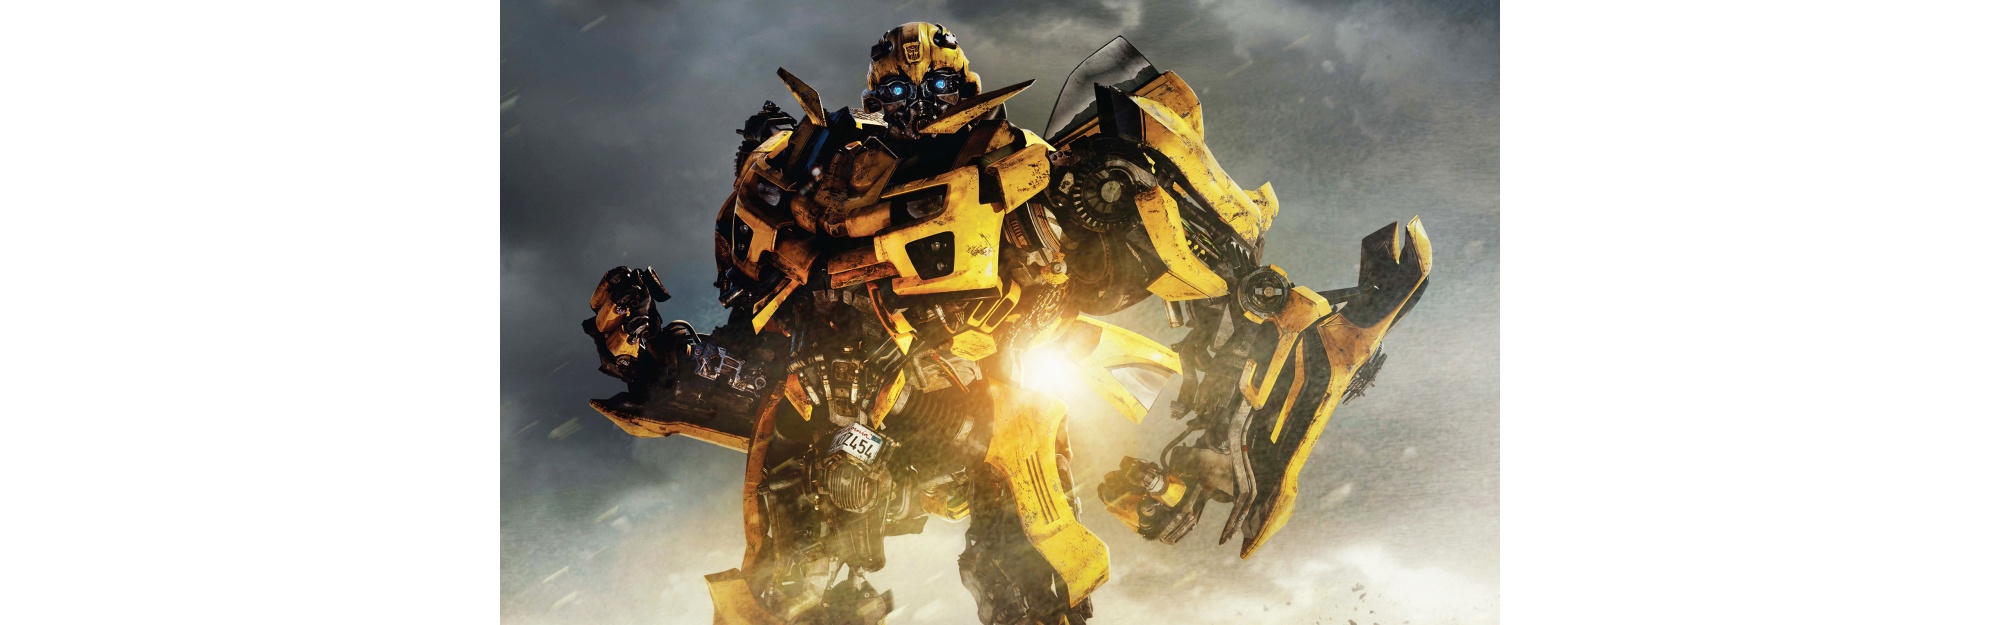 Transformers Bumblebee American Science Fiction Action